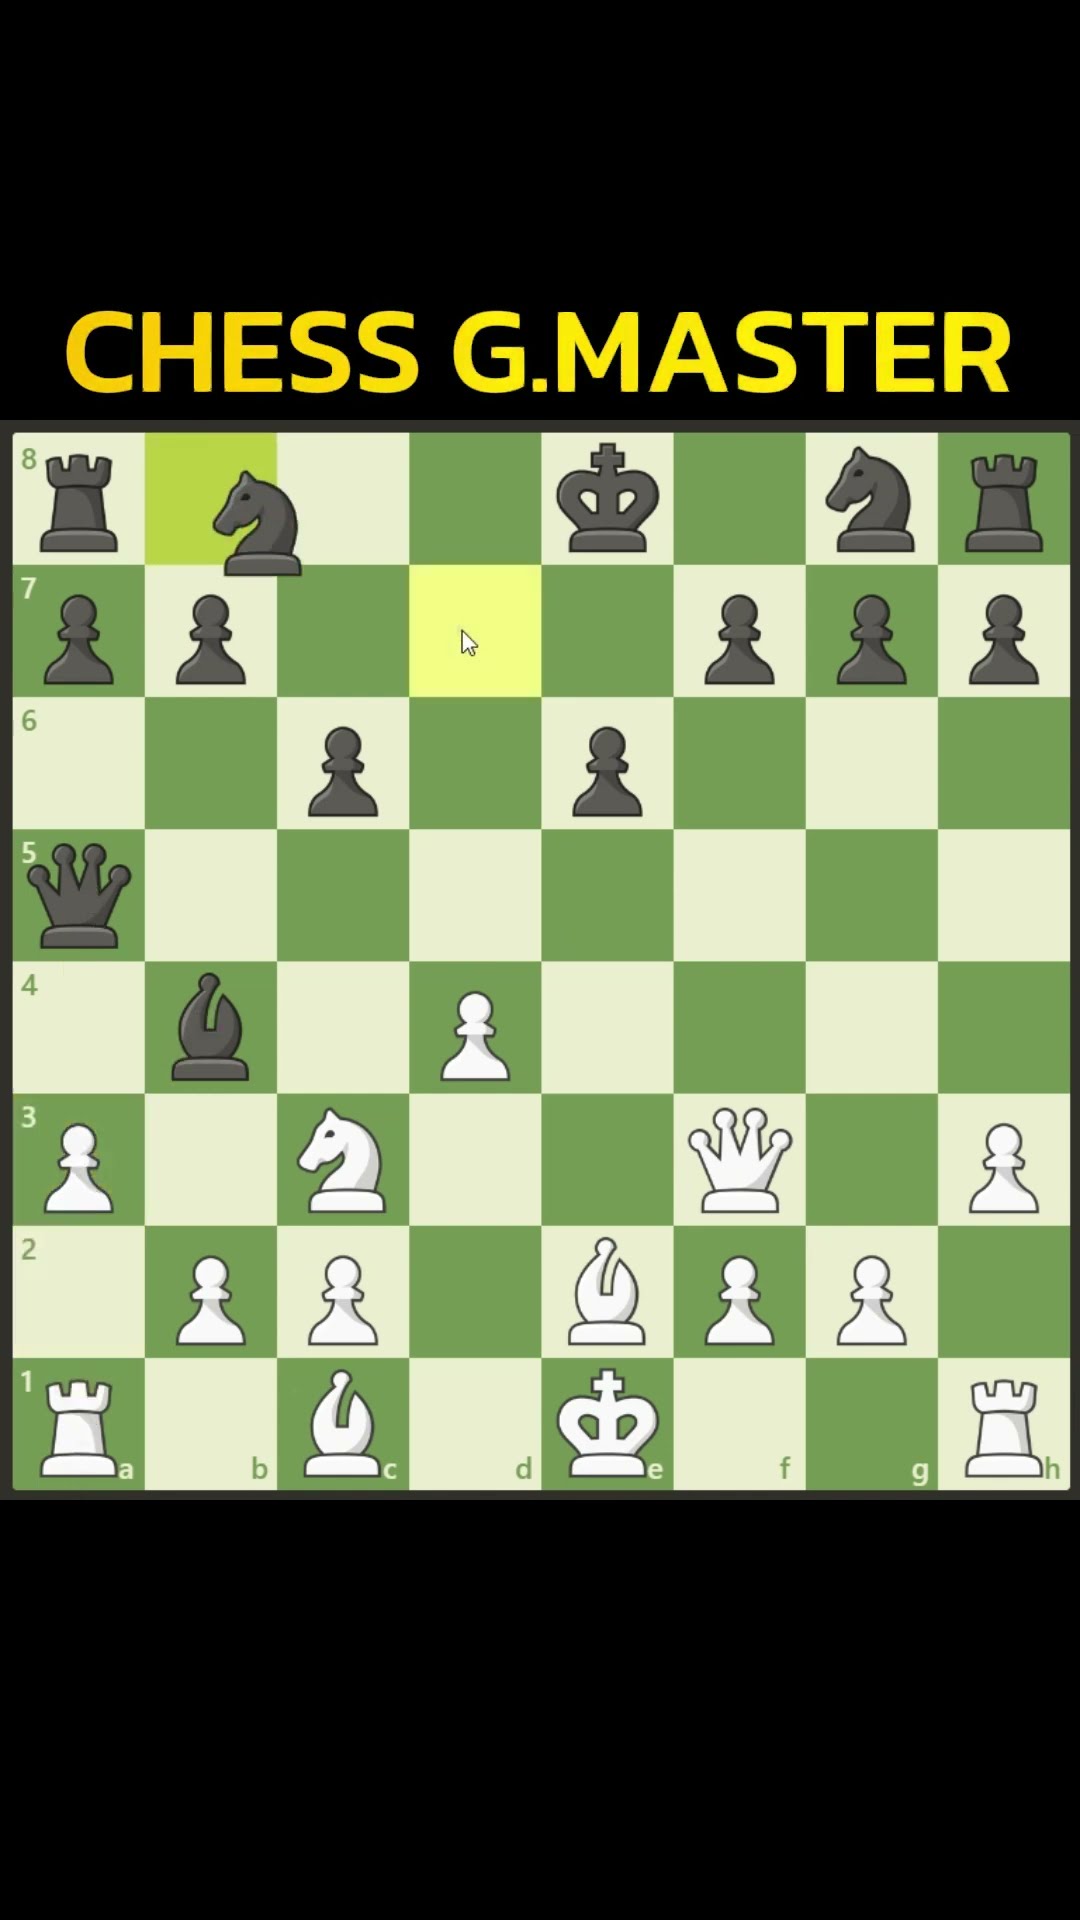 Sacrifice Queen and Two Rooks and Win #chessopenings #chesstrap #chessurdu #chesstricks #checkmate